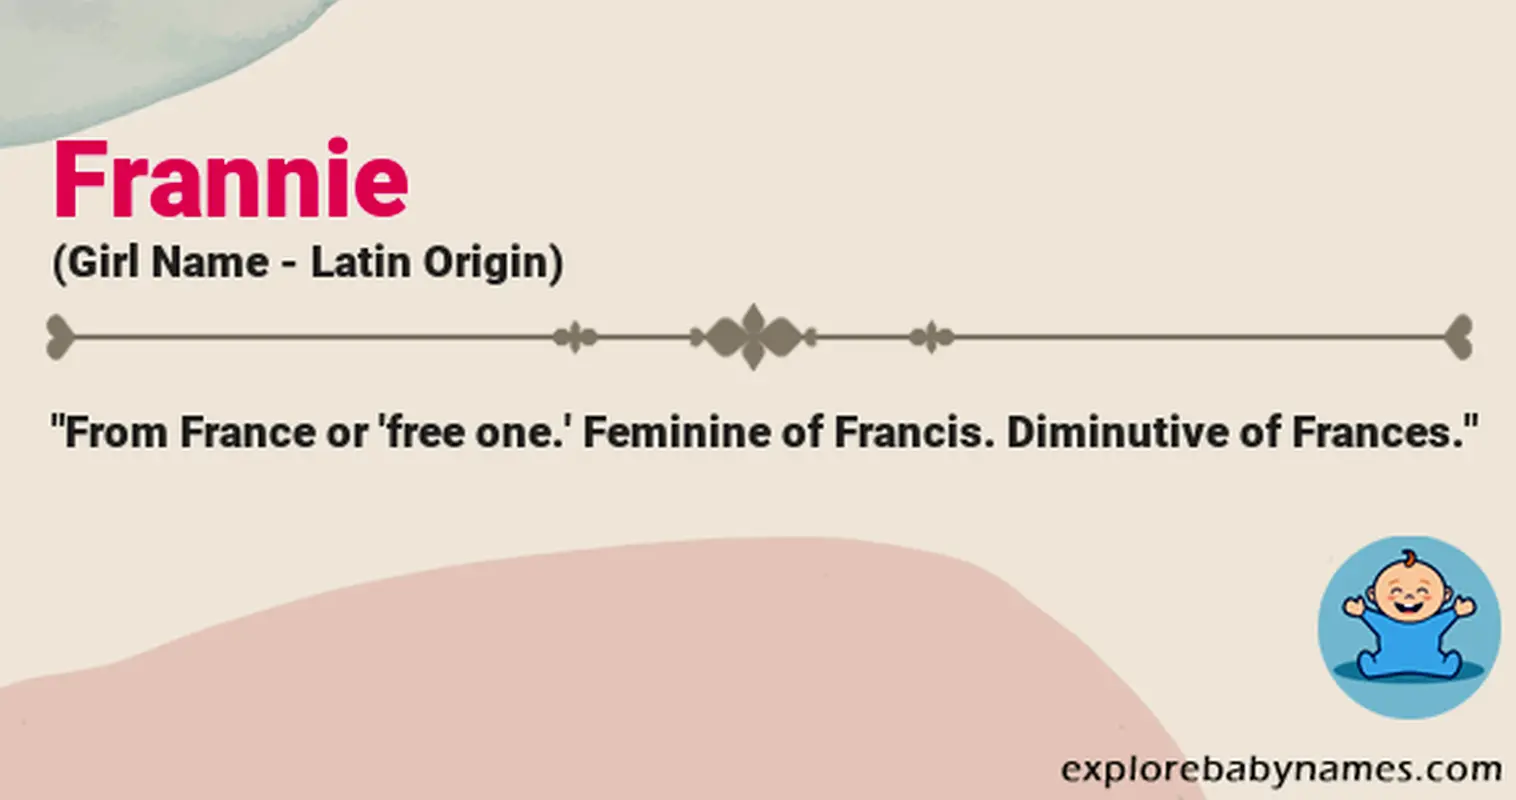 Meaning of Frannie